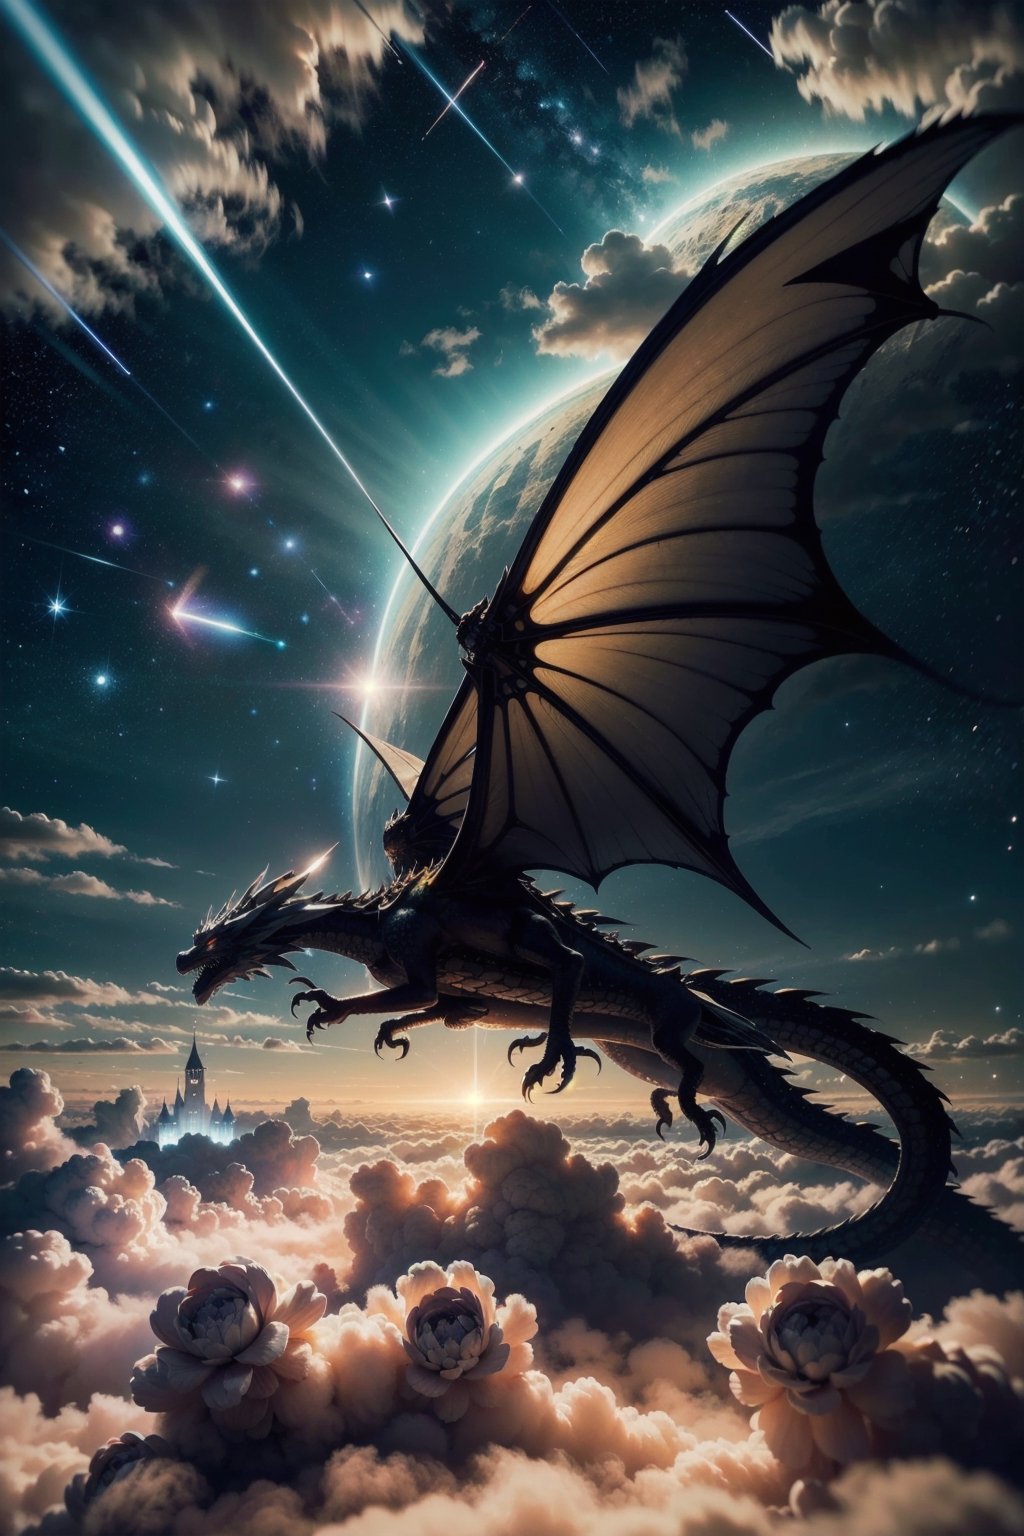 photorealistic photography in high definition, of a mystical fantasy scene, closeup of a dragon, open wings, flowers and butterflies should be around it, with interstellar space visible in the sky, with golden luminous flashes and shooting stars and castle Elevated above the clouds, a mystical and enigmatic scene